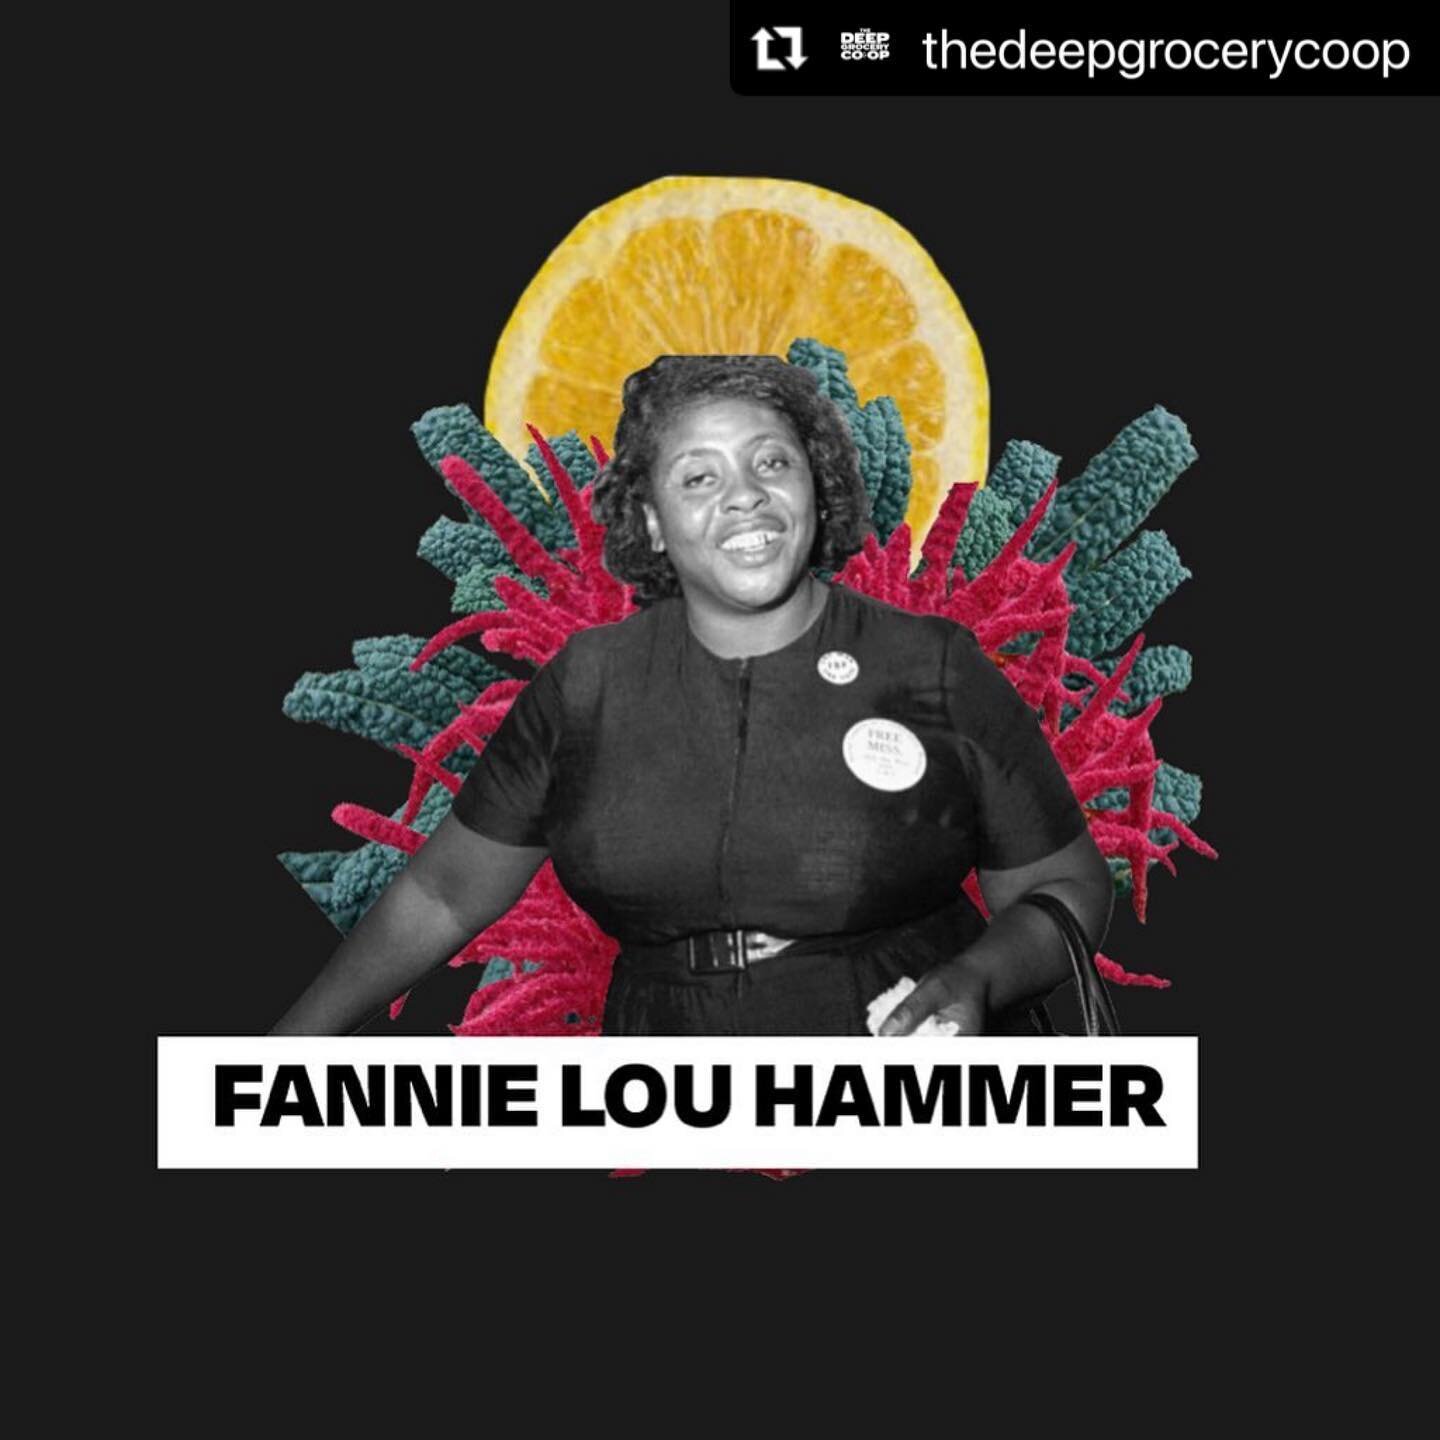 Happy Black History Month!! ✊🏽✊🏽✊🏽 

We start by reposting this beautiful portrait of organizer, Civil Rights leader and food justice fighter and Freedom Farm Cooperative founder Fannie Lou Hamer, whose impact can be found across movements and pol